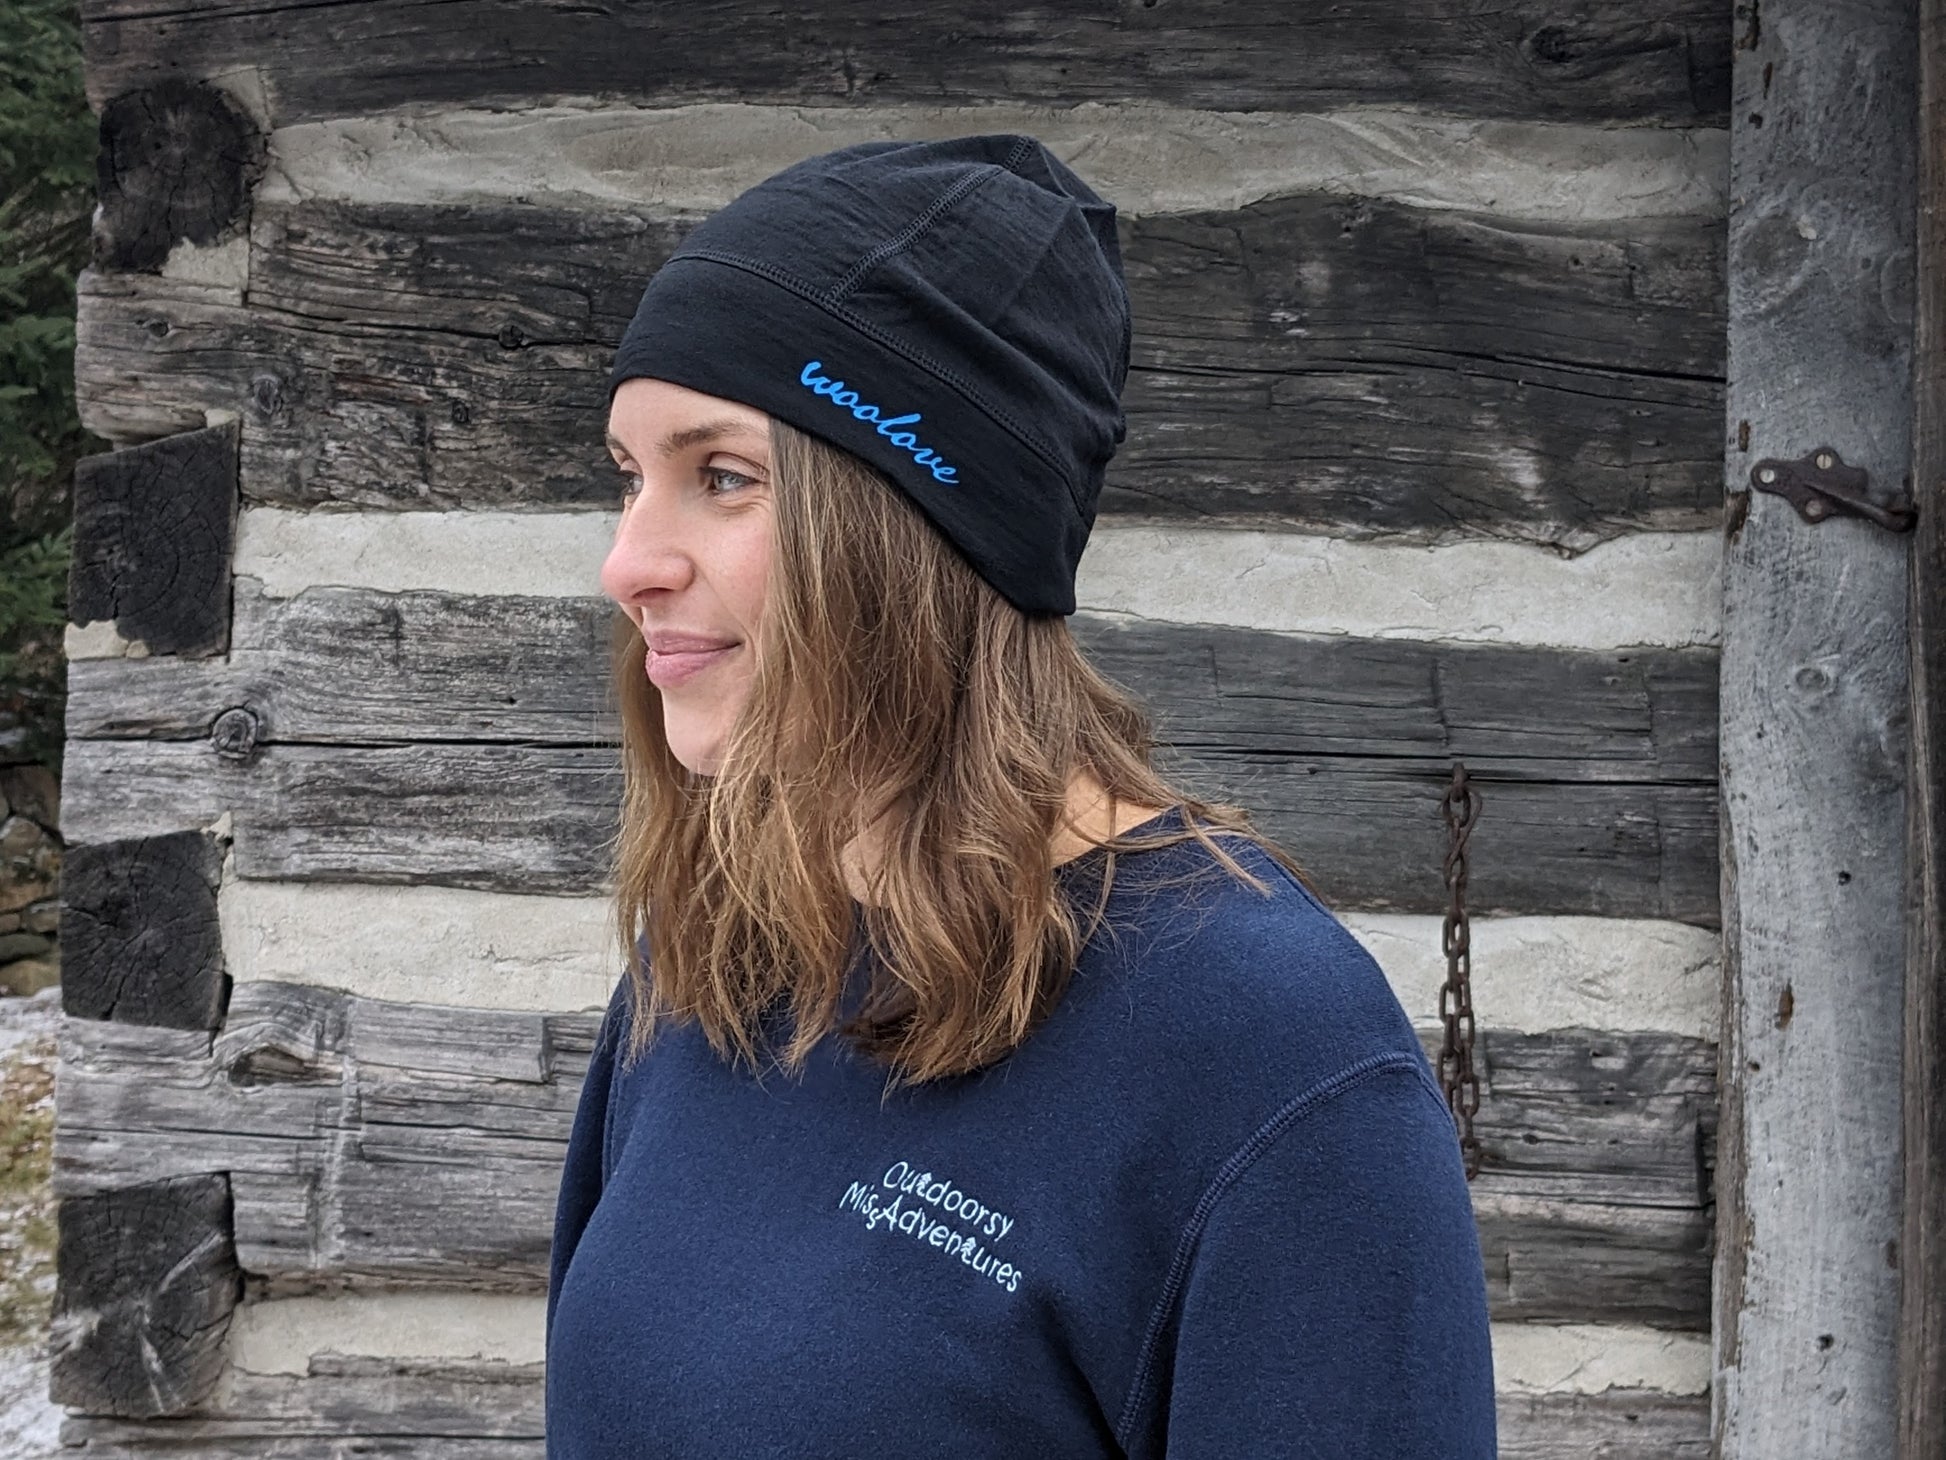 unisex one size fits most 100% Merino Wool Beanie Hat by Wool Love. This Merino Wool Beanie hat is perfect for wearing under your fat biking or hockey or snowboarding helmet. A great cold weather 'go to' to keep in your pocket or purse for when the cold creeps up on you!